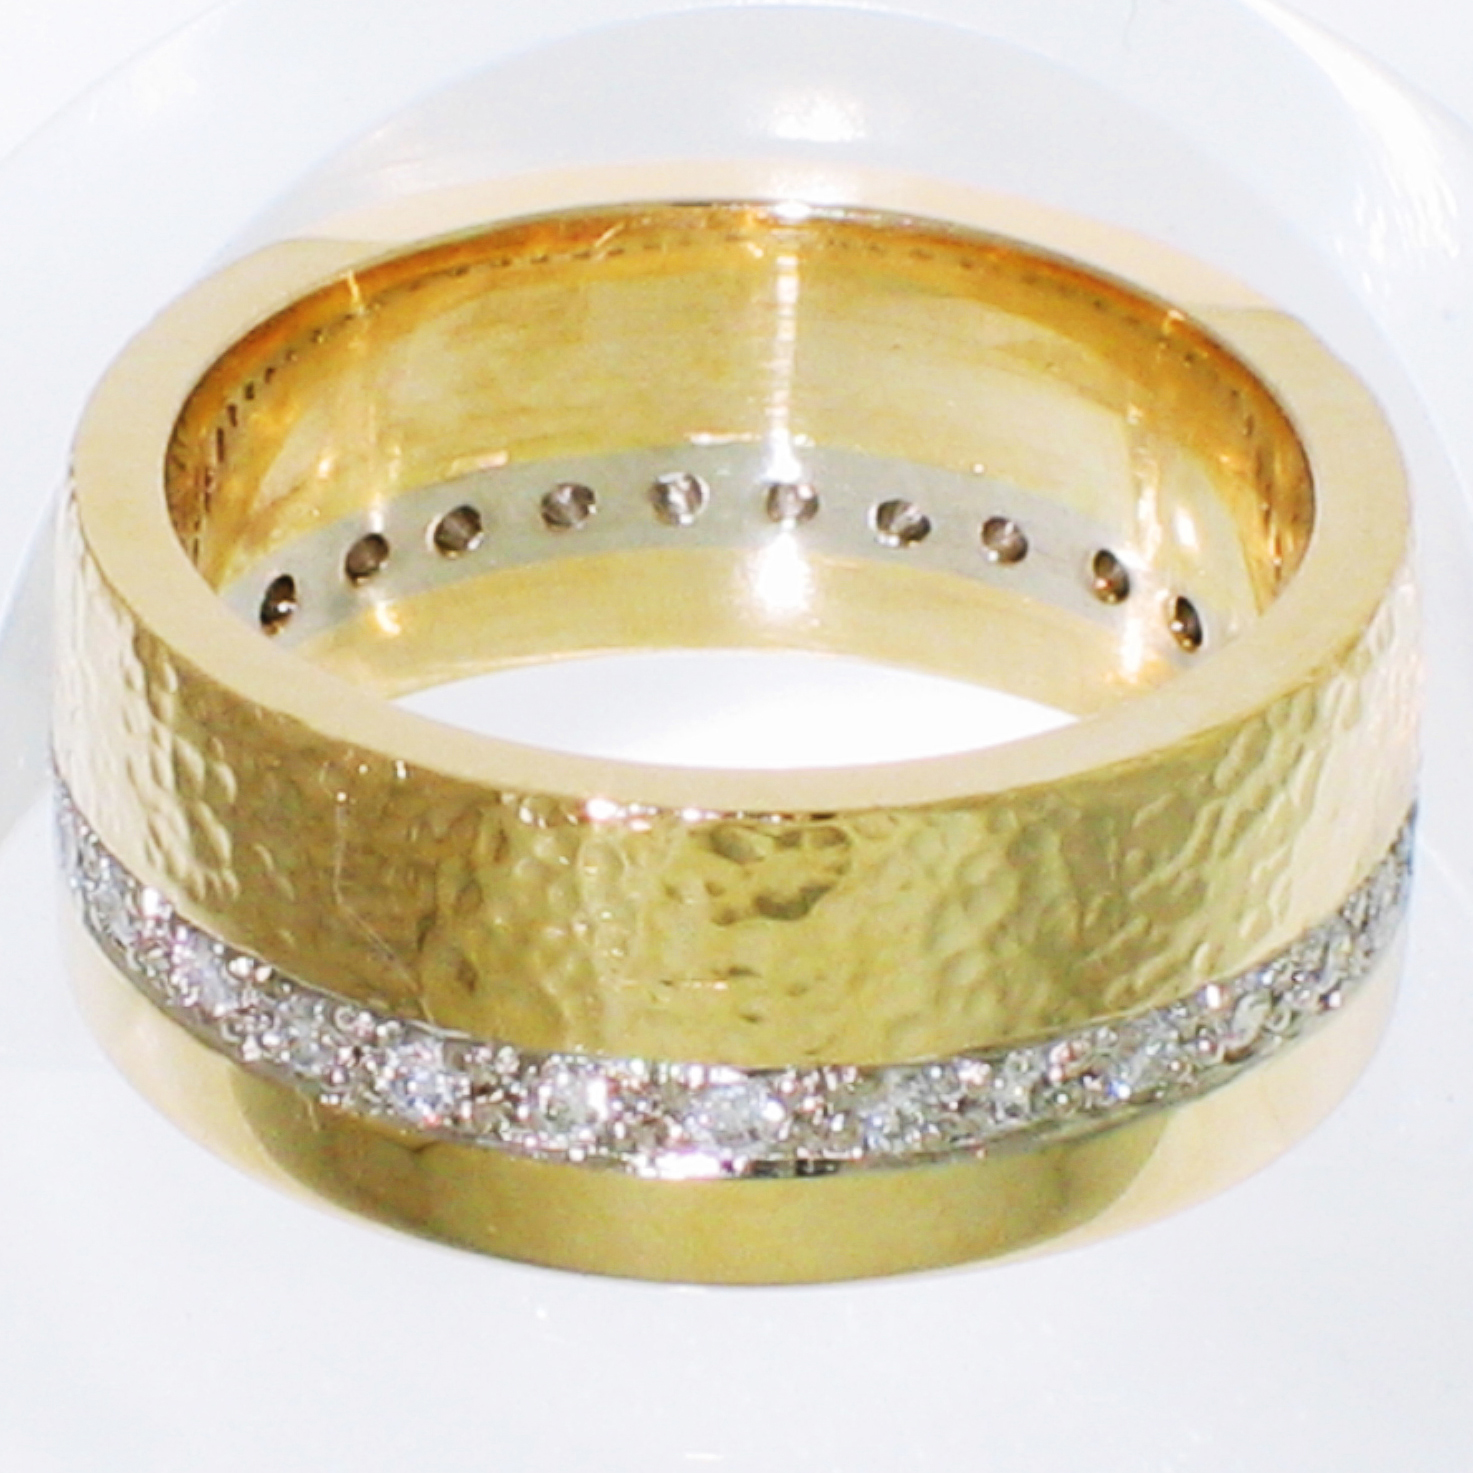 14 Karat Yellow and White Gold 2-tone band with bead-set white diamonds and hammered and high-polished finishes